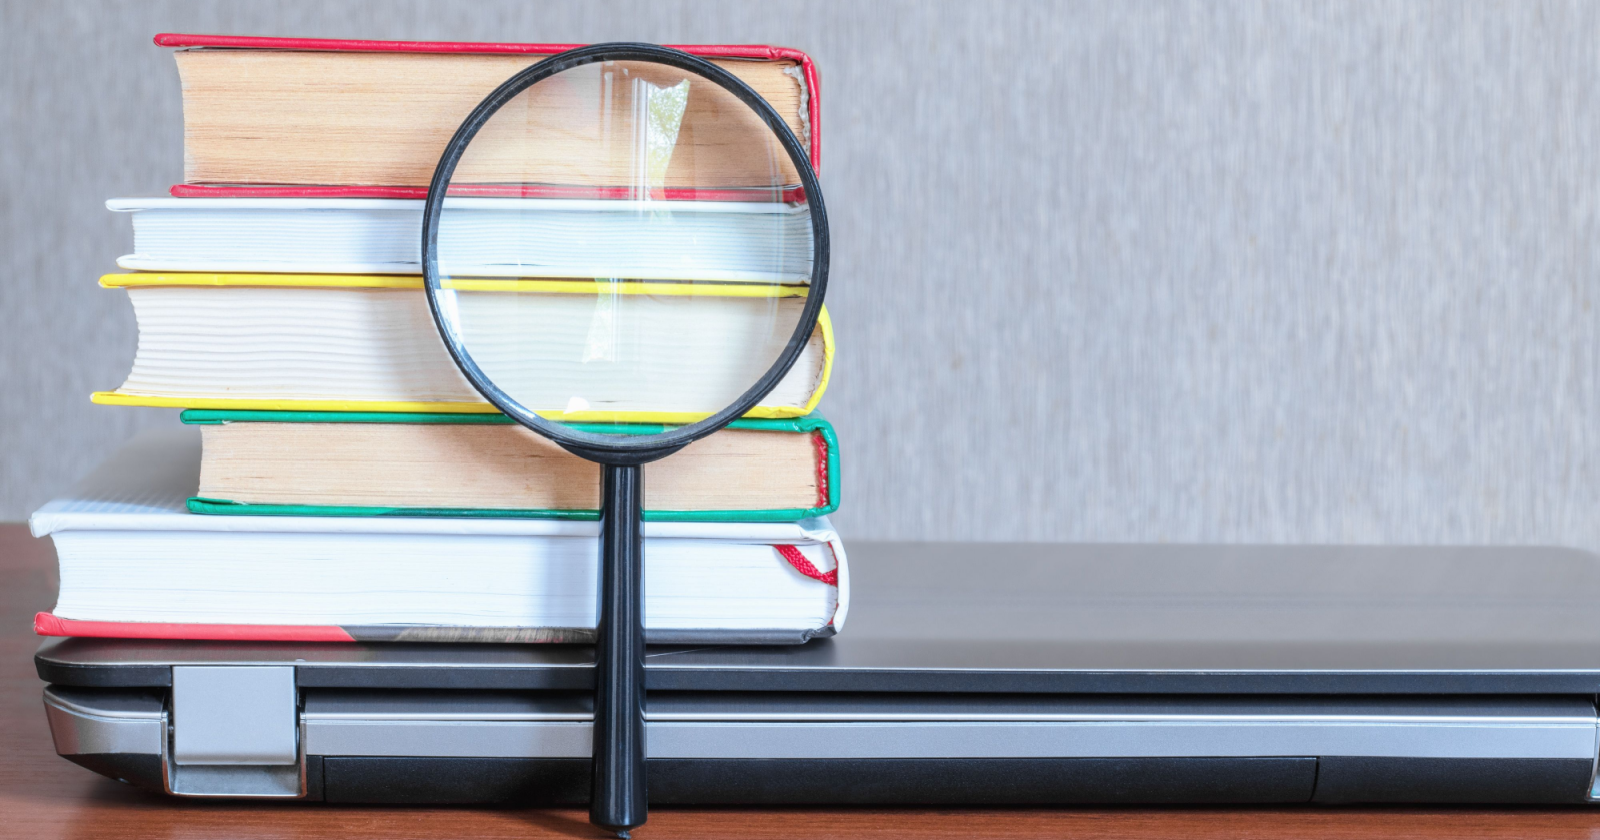 A magnifying glass in front of a stack of books and a closed laptop on a wooden desk, primed for search results analysis.